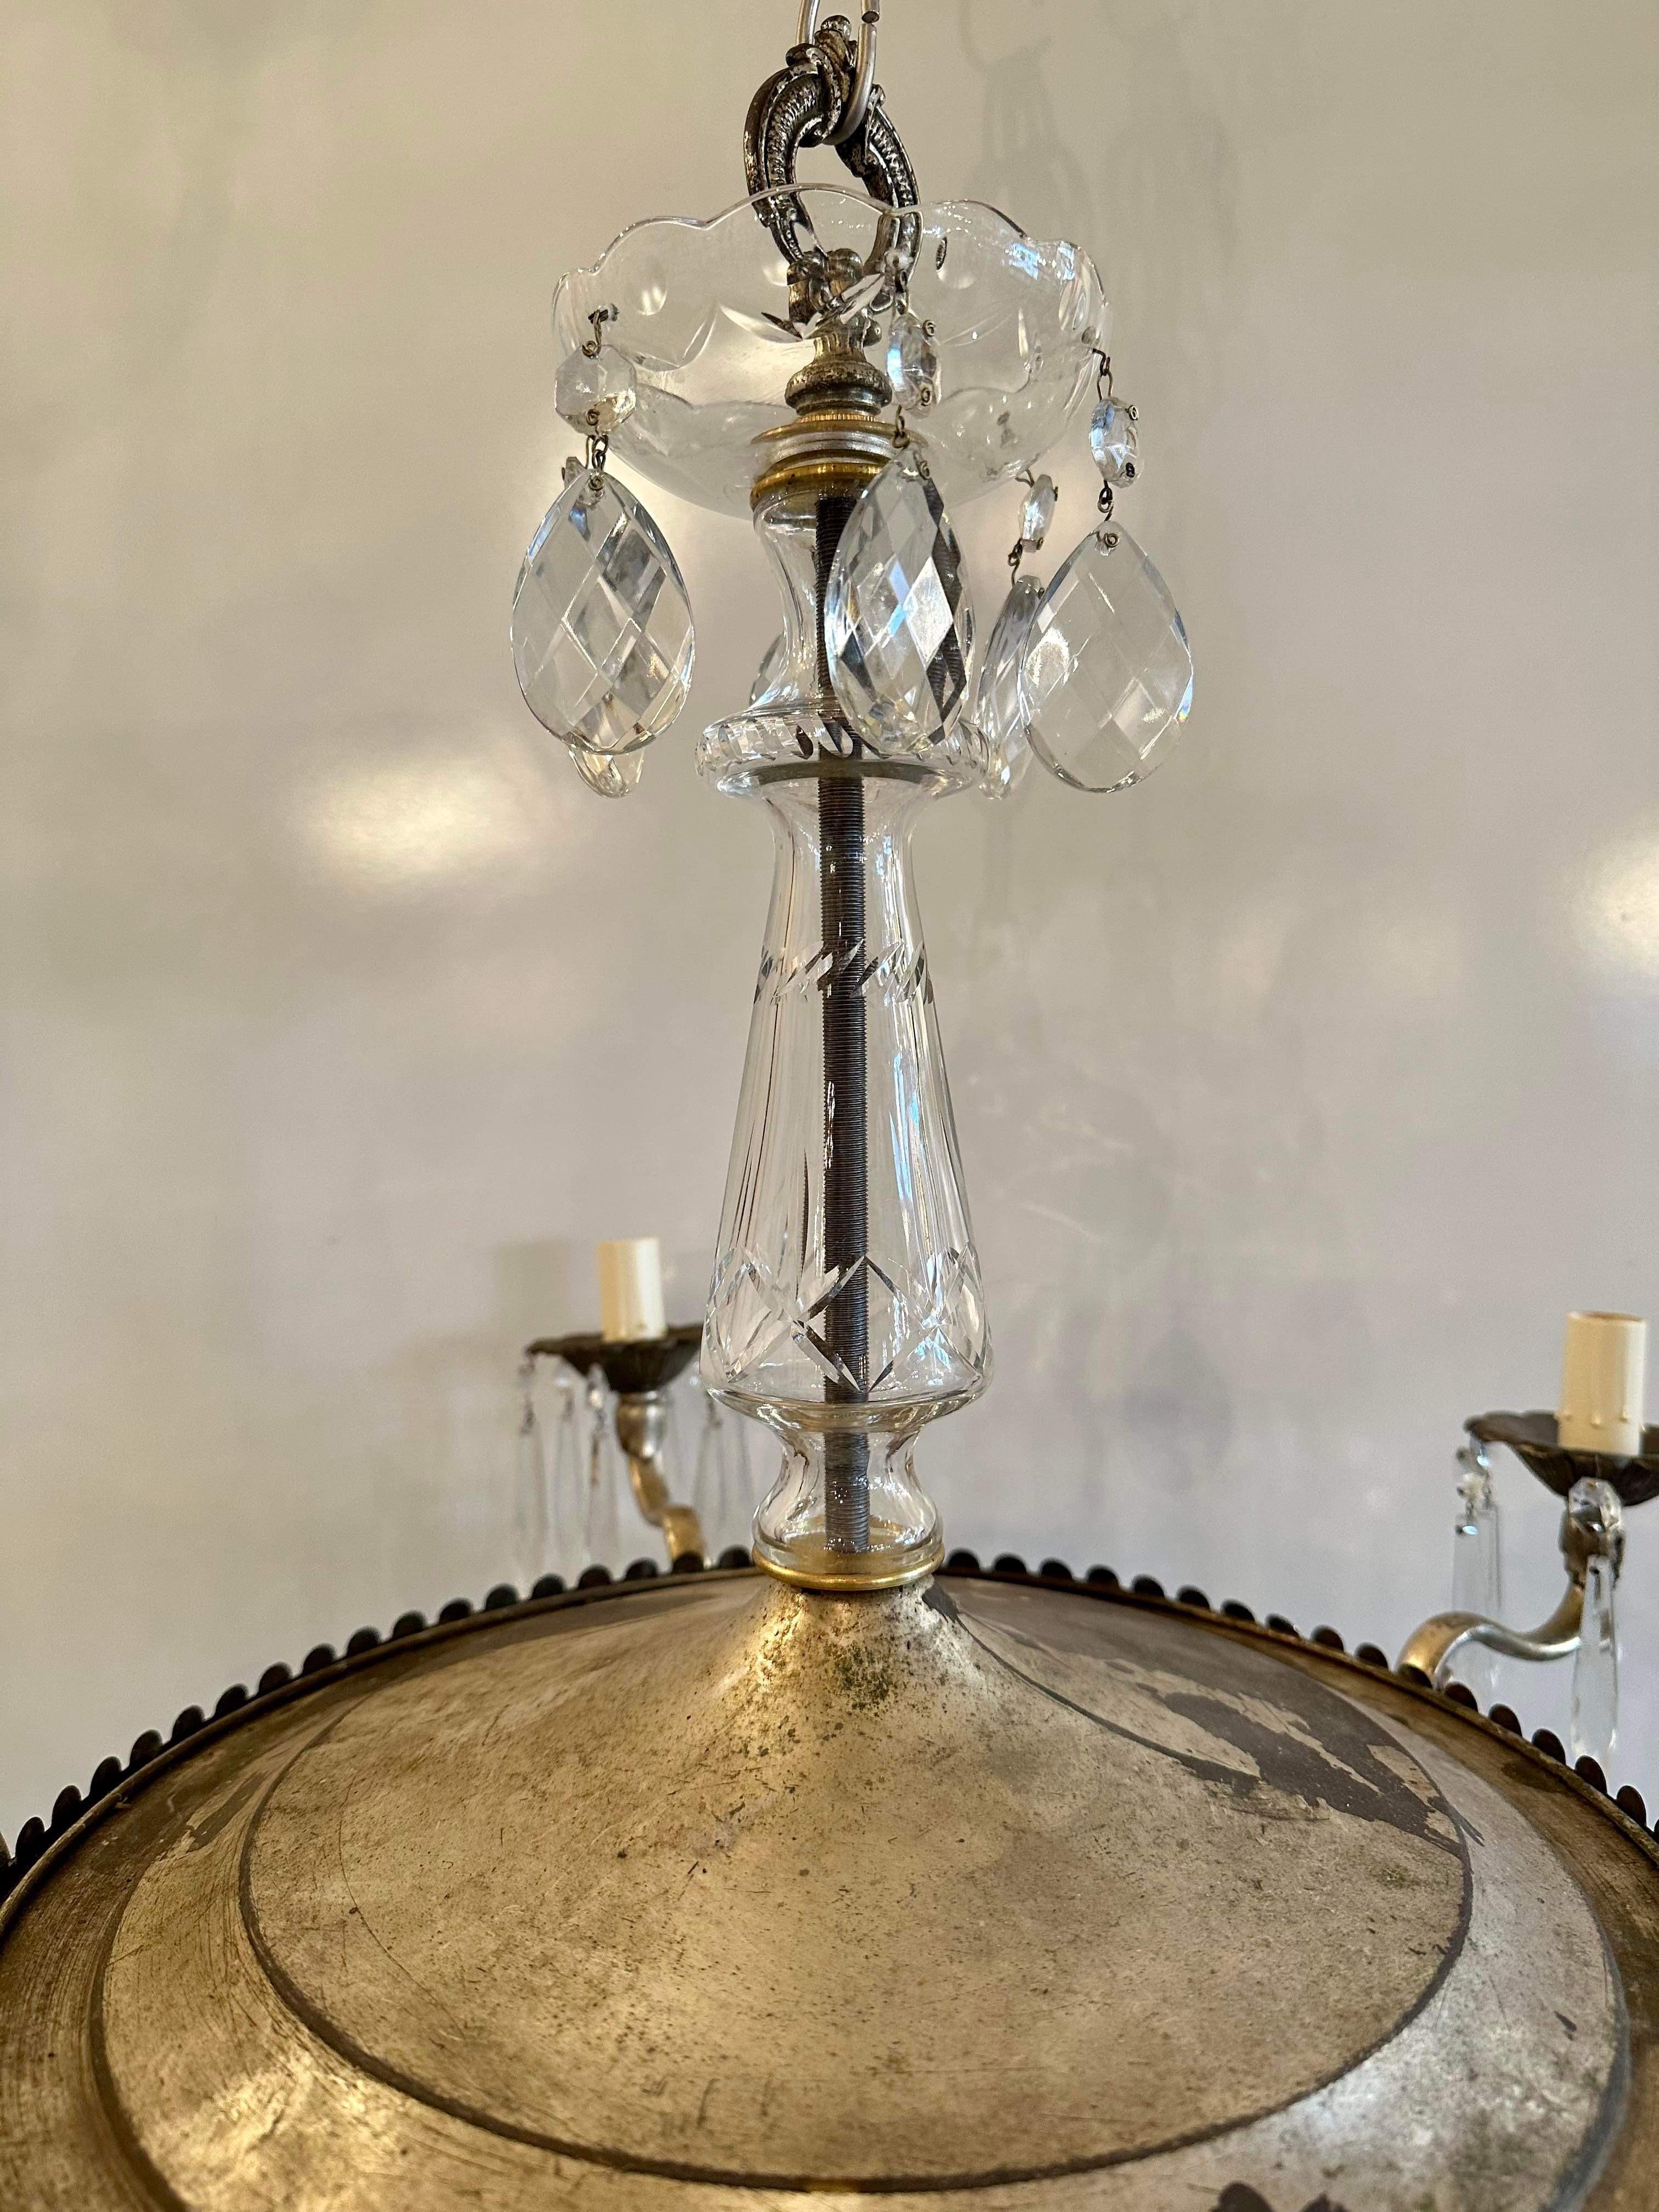 Early 1800’s empire chandelier with silver finish. 
Price would include all restoration and UL approved wiring and parts. 